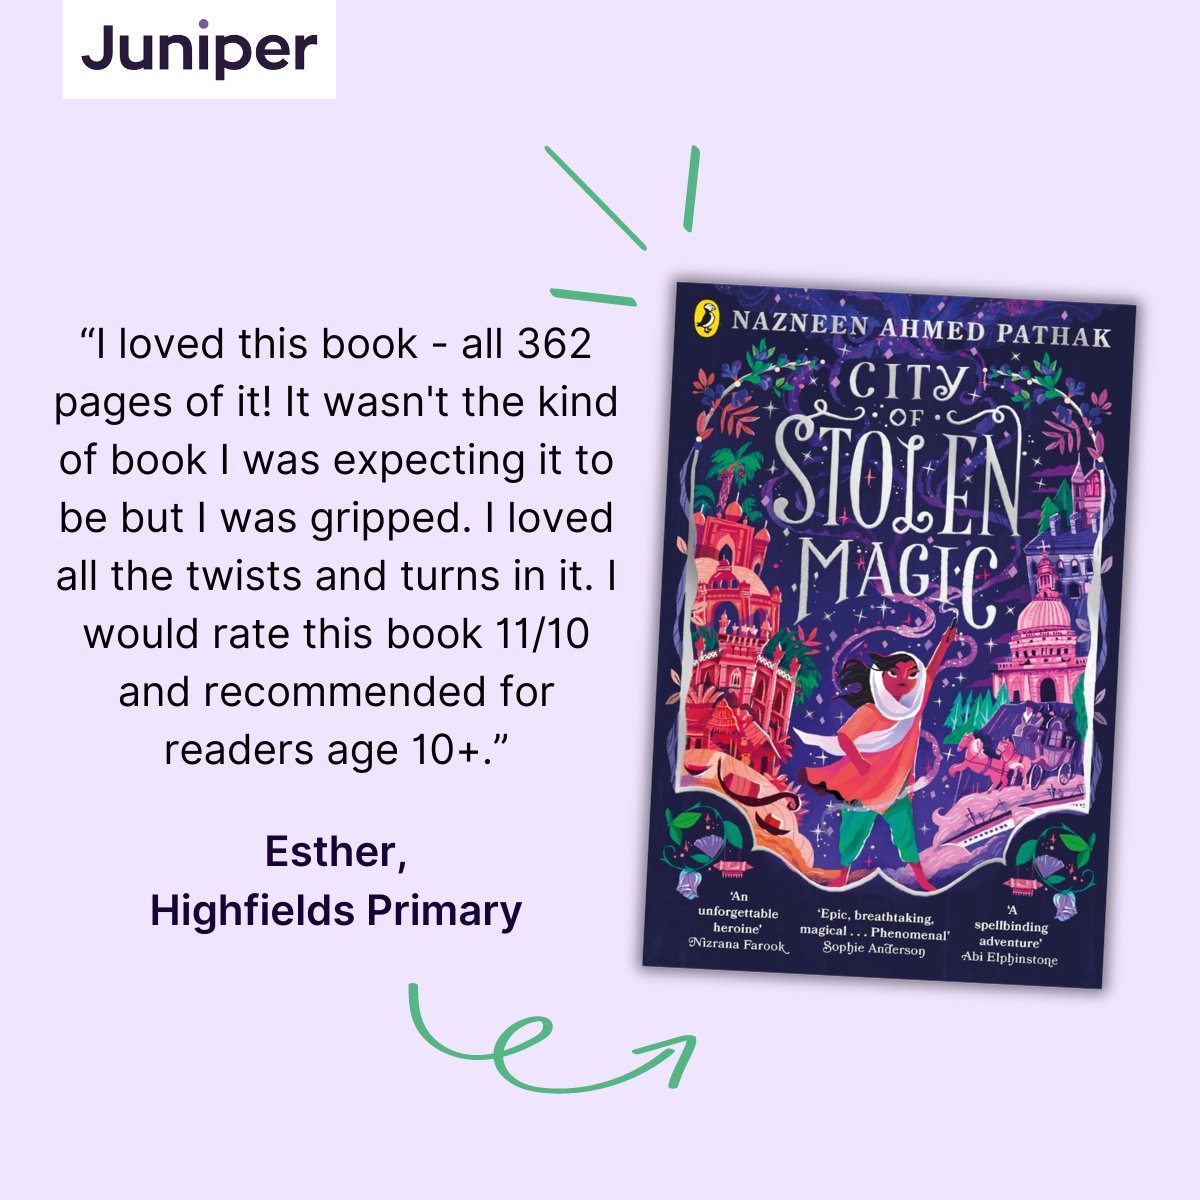 Esther from Highfields Primary reviews City of Stolen Magin by @nazneen372: 'I loved this book - all 362 pages of it!' #WorldBookDay #JuniperBookAwards